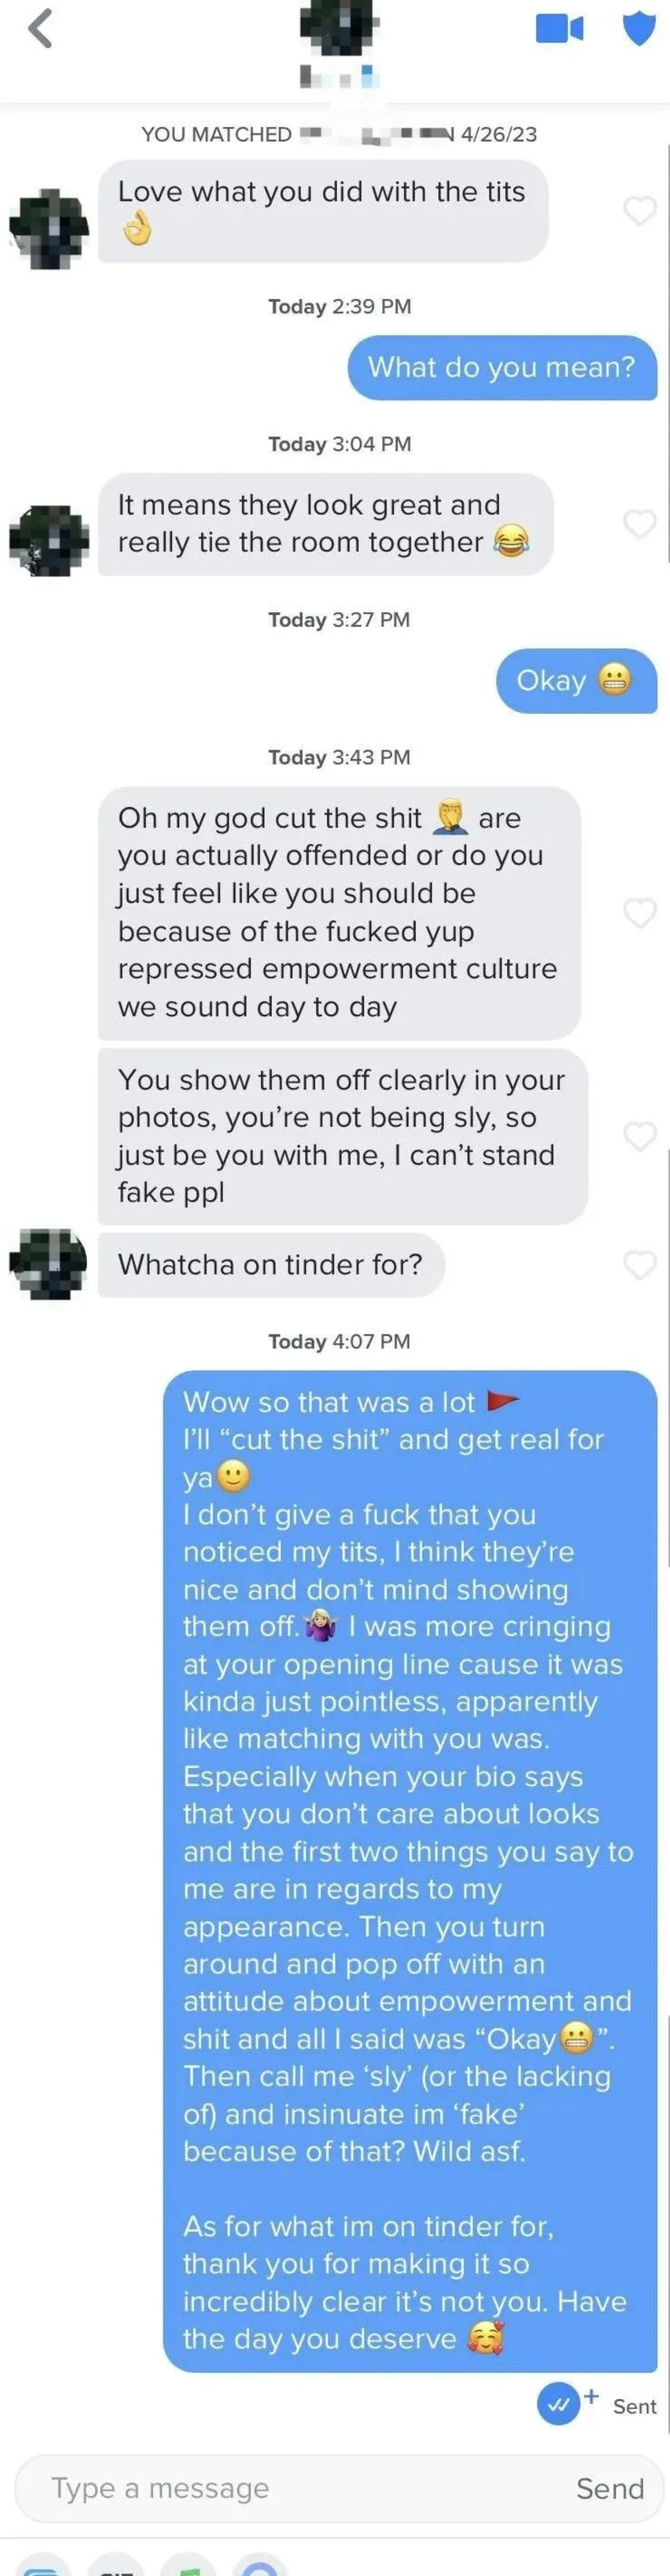 Opening line is &quot;Love what you did with the tits&quot; and then doesn&#x27;t understand why the woman is offended and asks why is she on Tinder if she doesn&#x27;t want comments like that